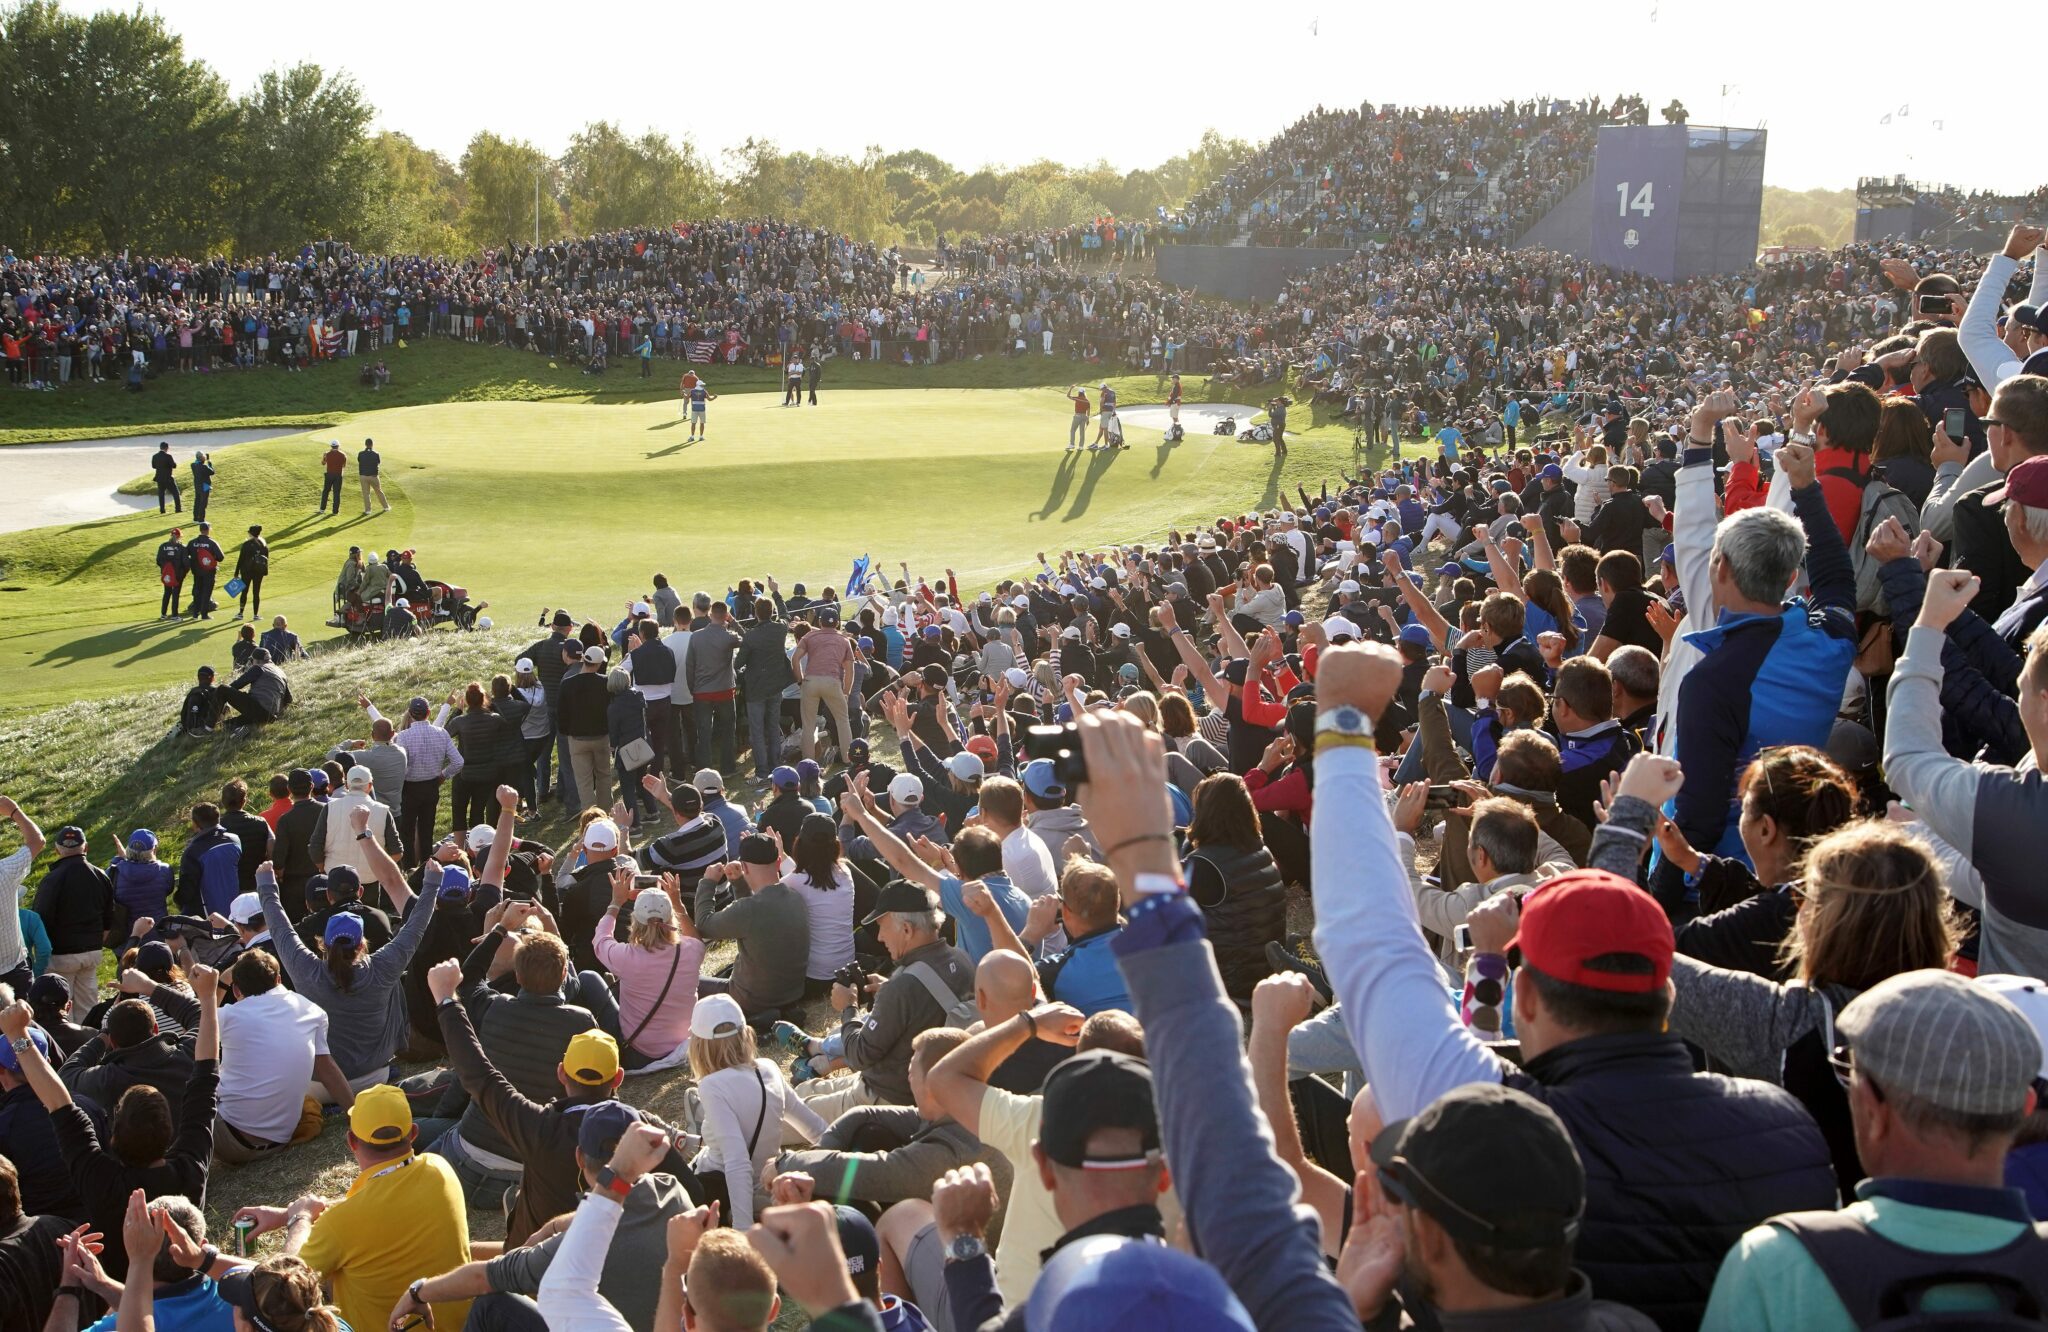 Crowd cheering at the Ryder Cup